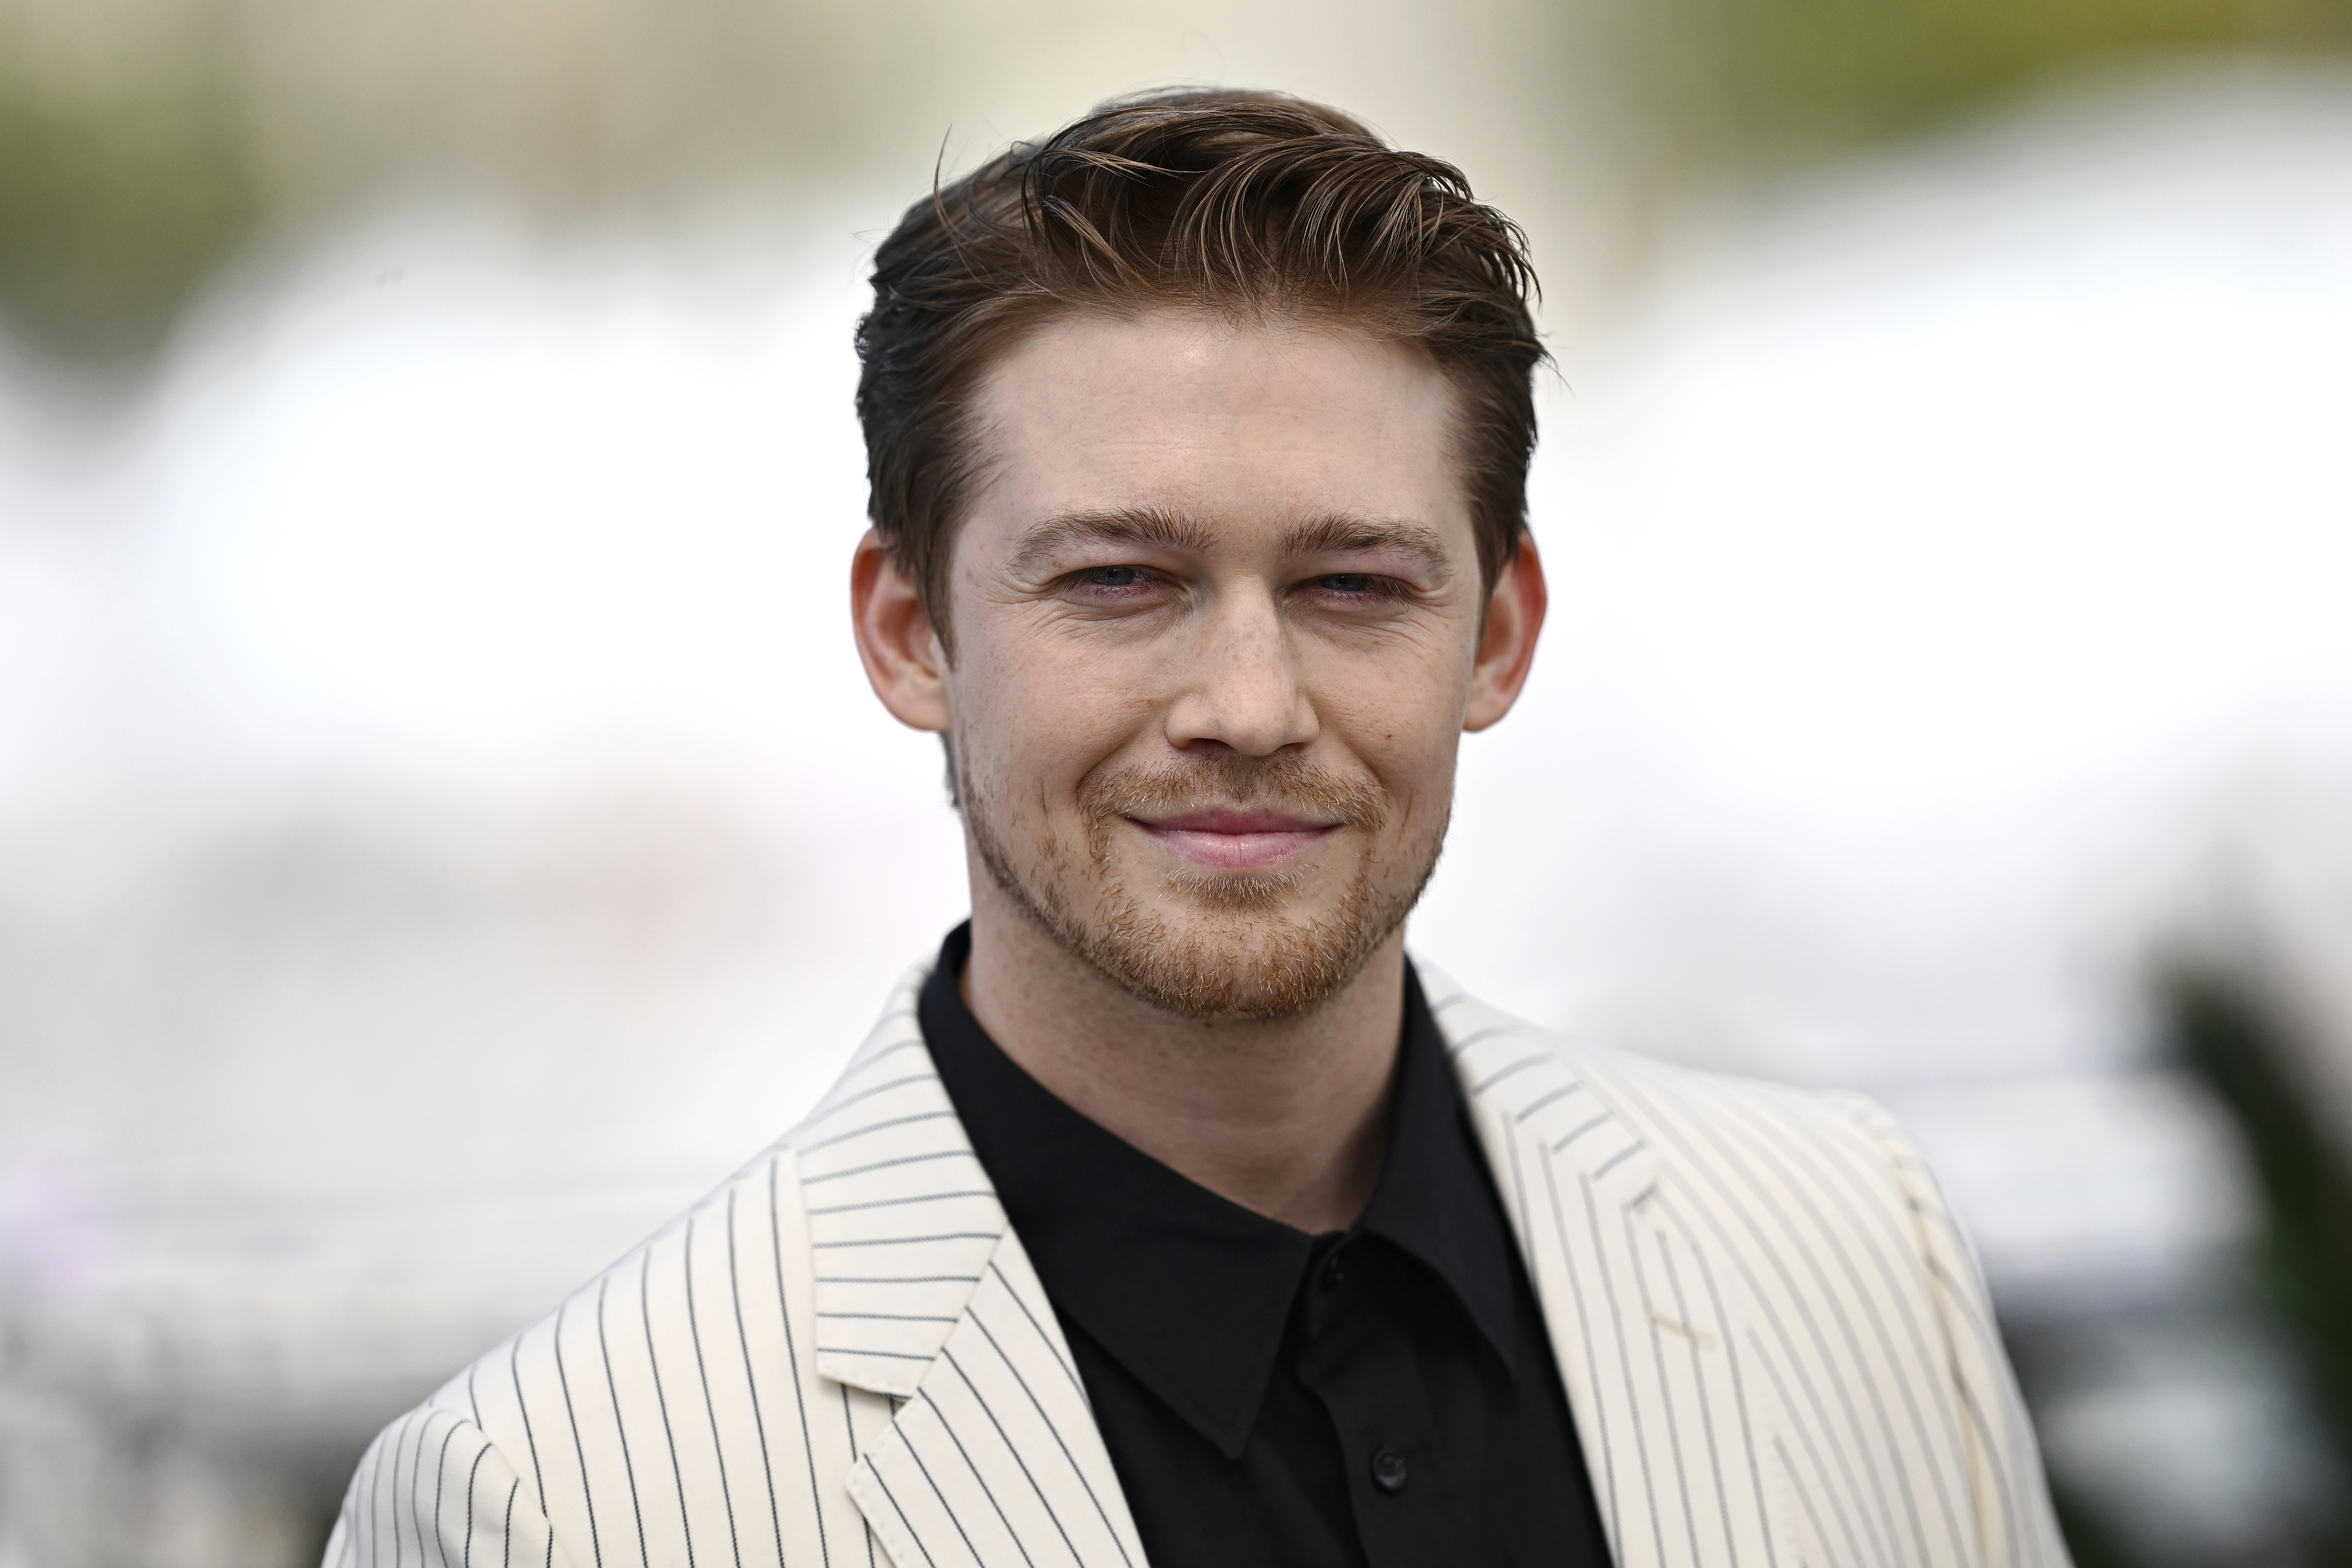 Joe Alwyn is wearing a light striped suit jacket and a dark shirt, posing and smiling